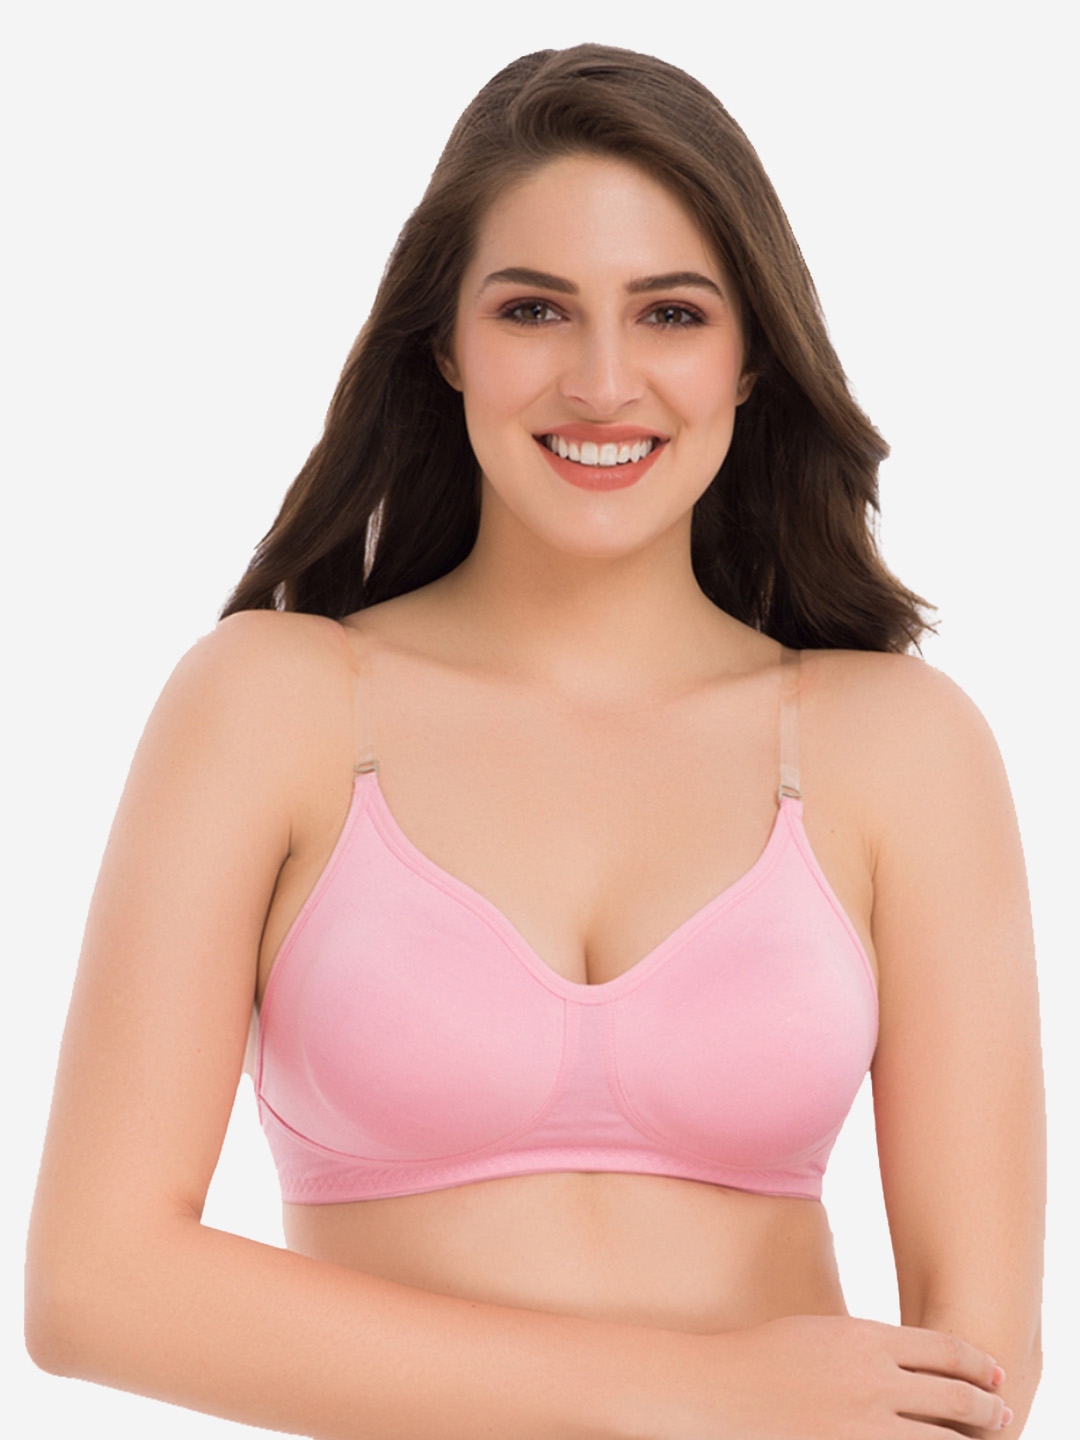 Buy GROVERSONS Paris Beauty Pink Non Padded & Non Wired Cotton Bra - Bra  for Women 20925666